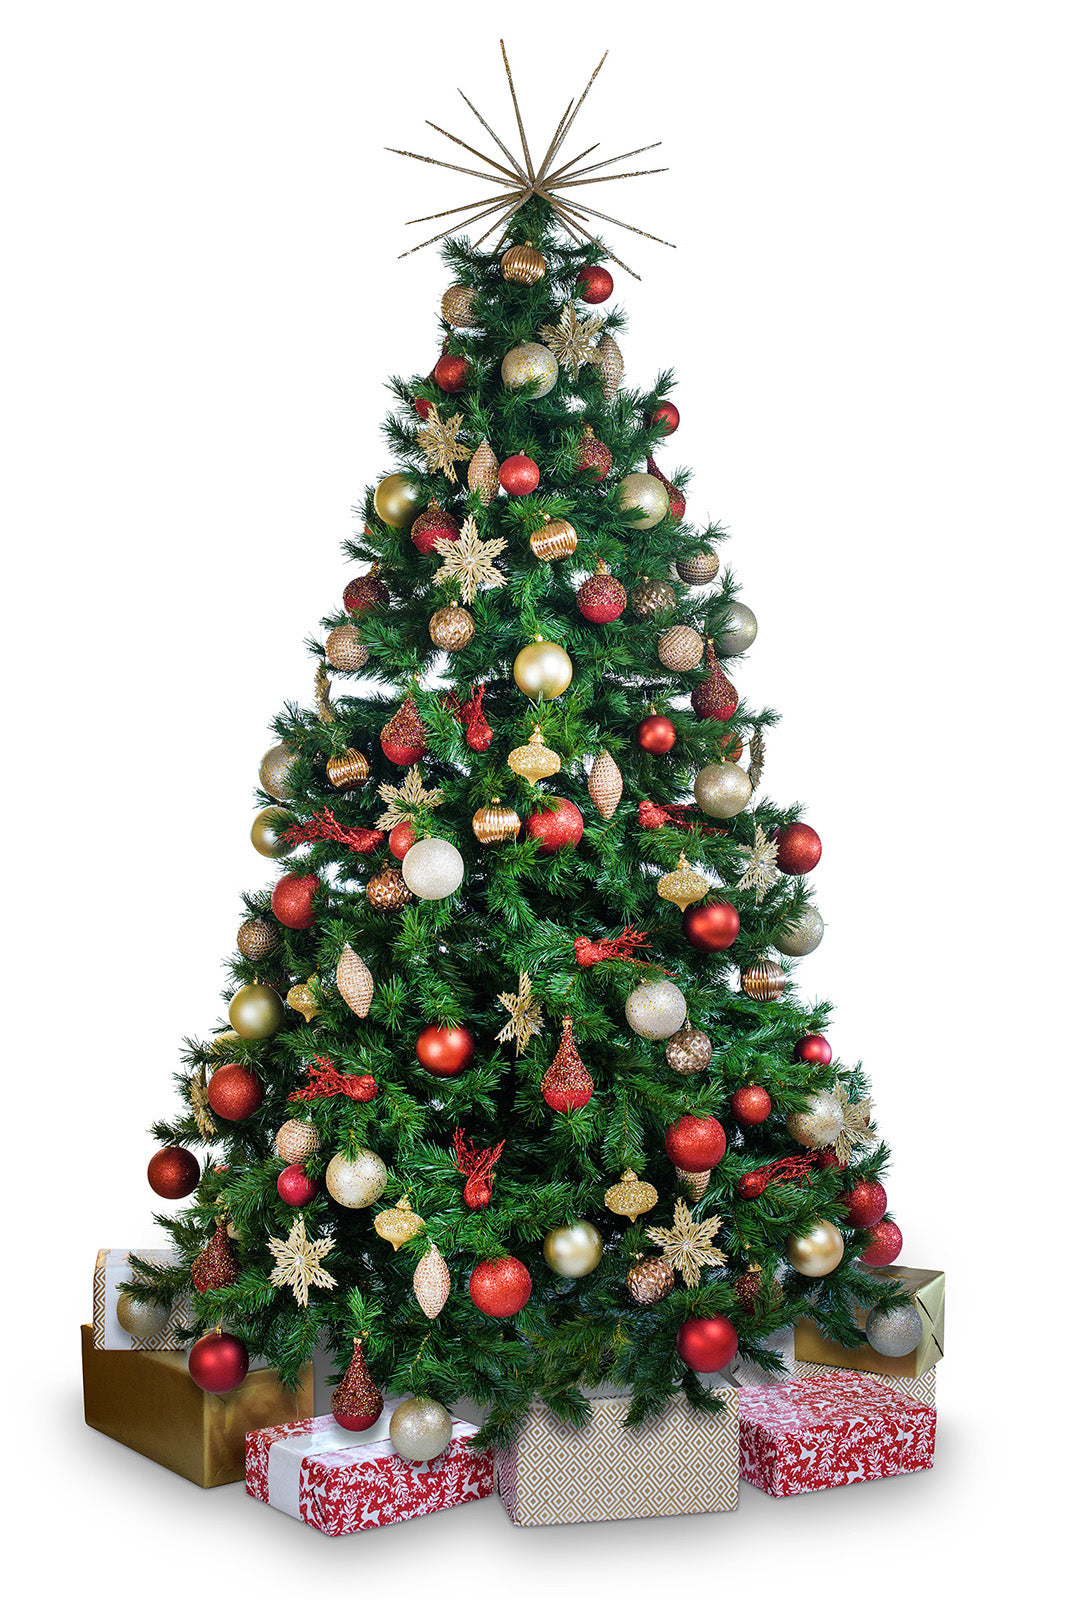 Faux Christmas Presents are the perfect finishing touch for your decorated Christmas tree. Available for hire in Melbourne, Geelong, Morning Peninsula and surrounds.